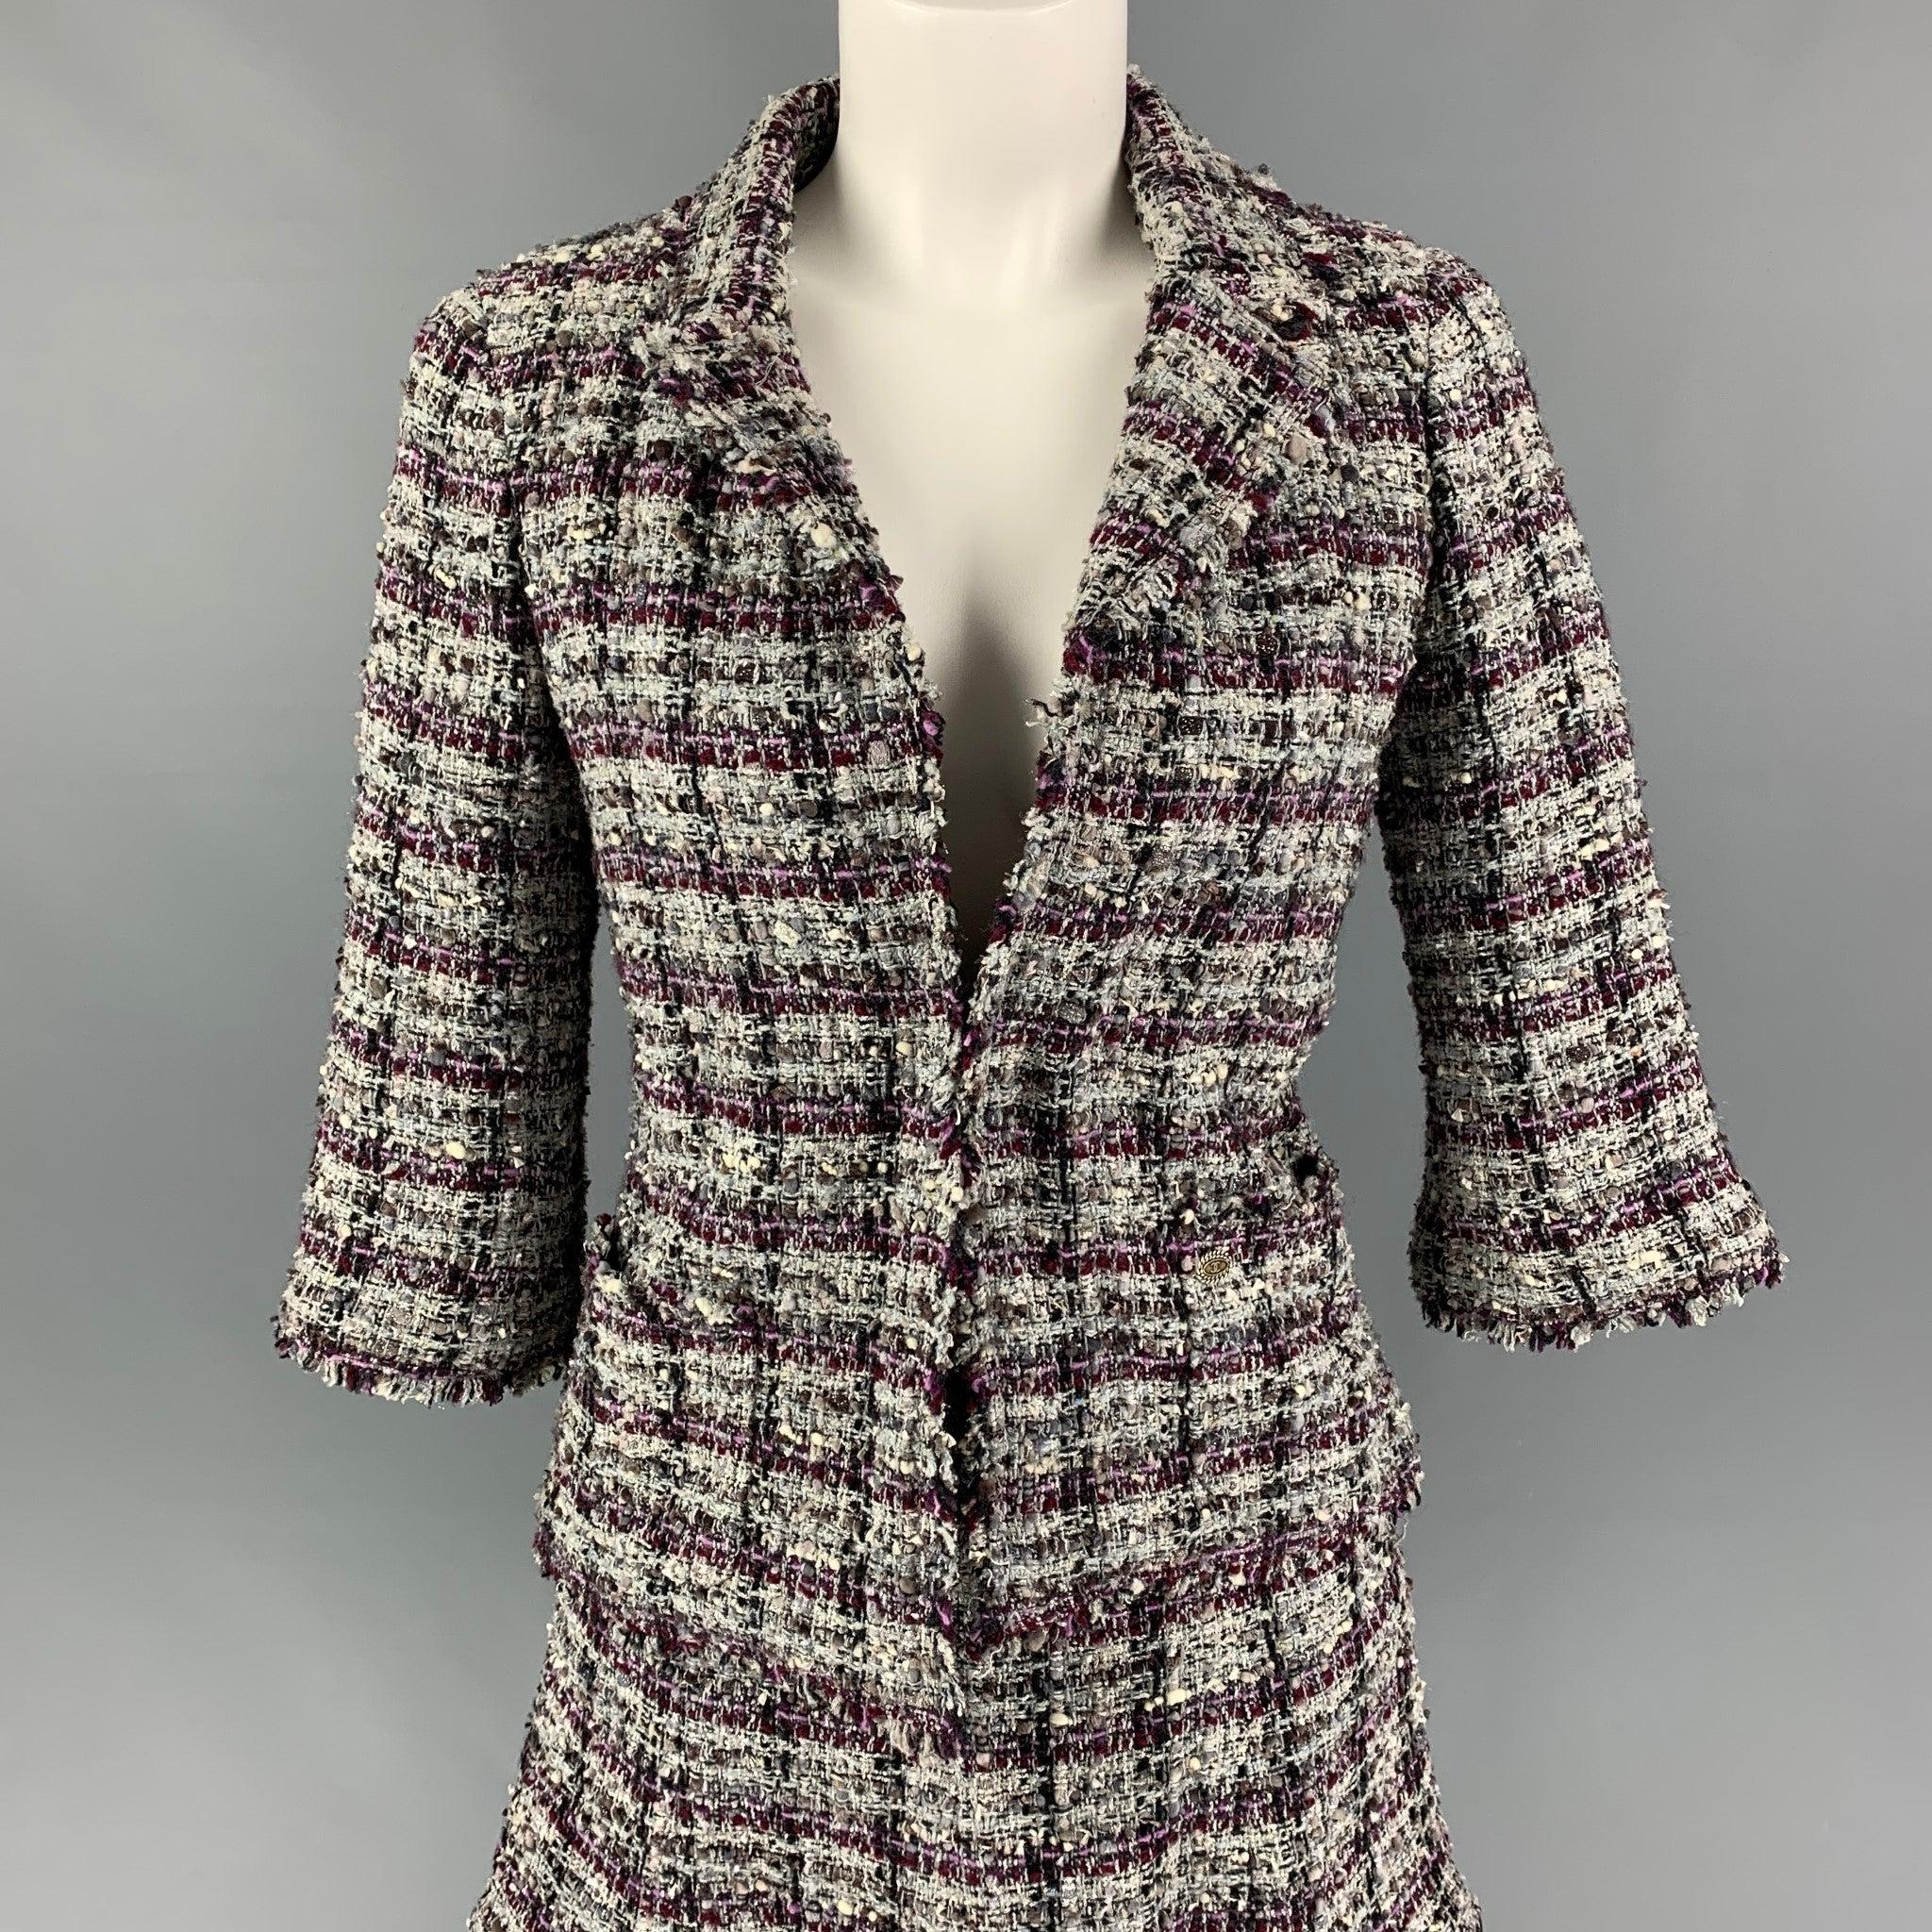 CHANEL skirt set comes in a purple & grey boucle polyester blend featuring a notch lapel, silver tone buttons, open front, and a matching layered skirt. Includes extra fabric. Made in France.
Very Good
Pre-Owned Condition. 

Marked:   M4137 05A / 36